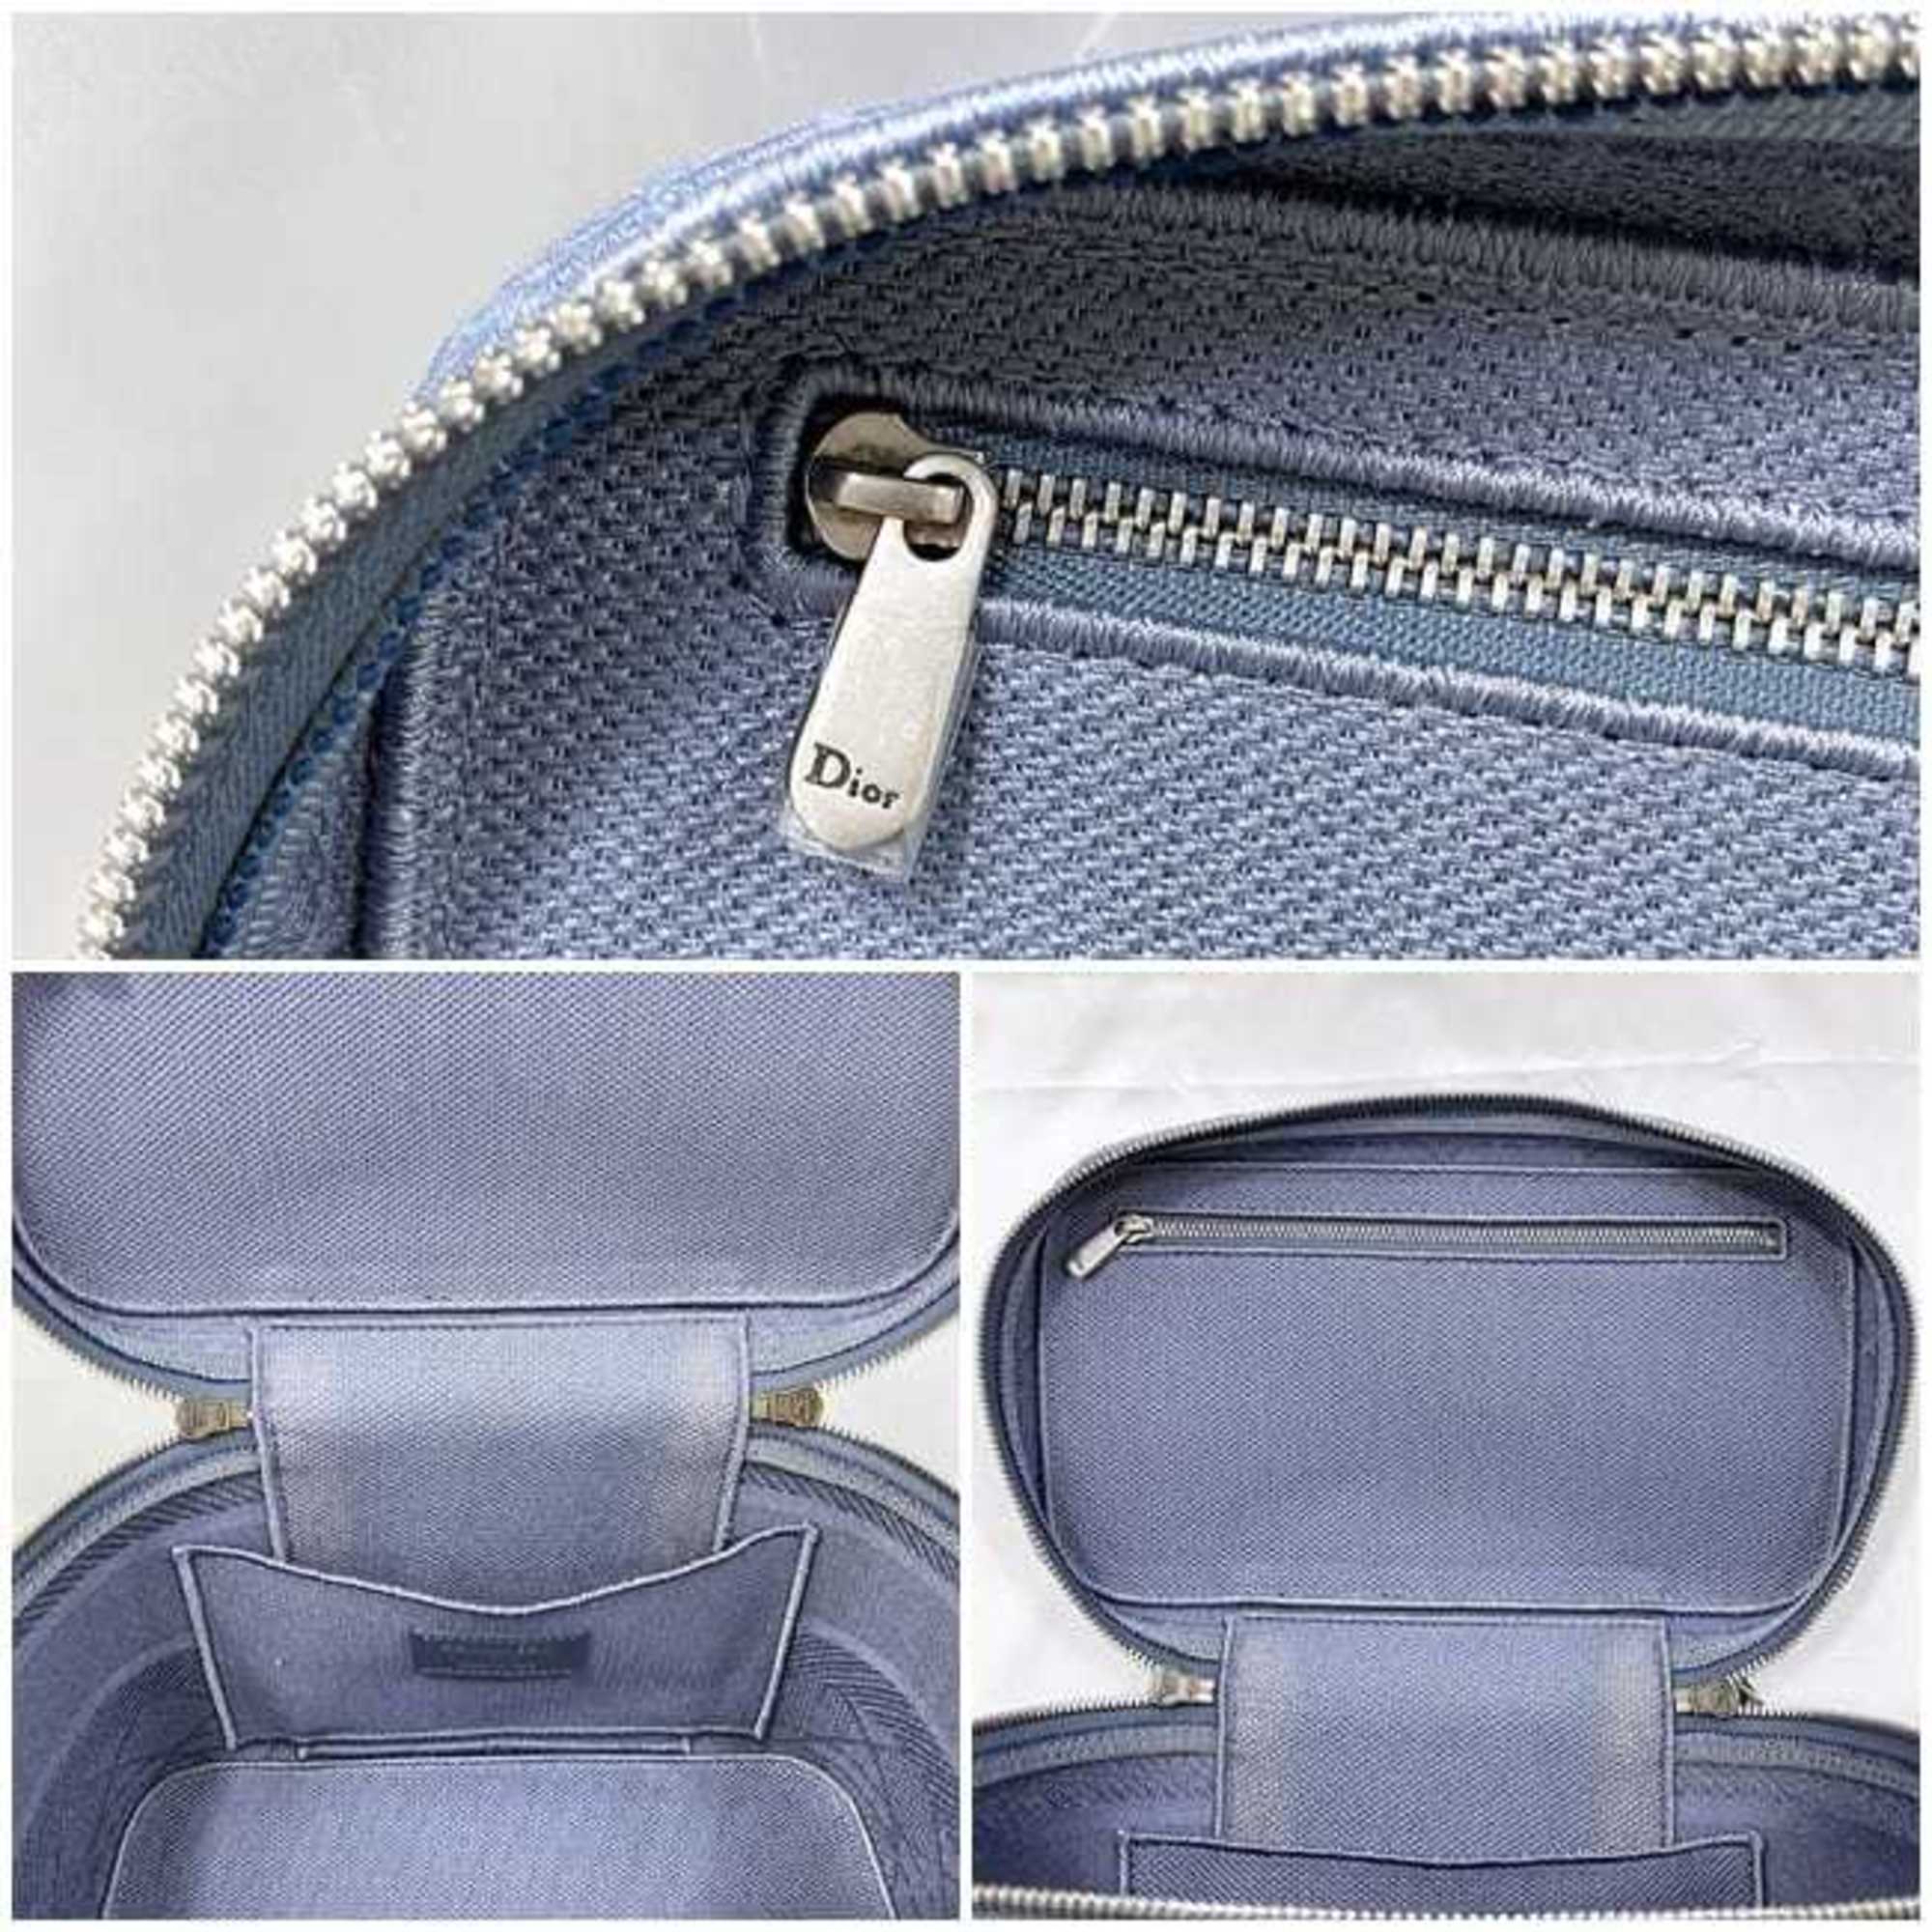 Christian Dior handbag vanity bag light blue cannage f-20528 canvas embroidery self-supporting double